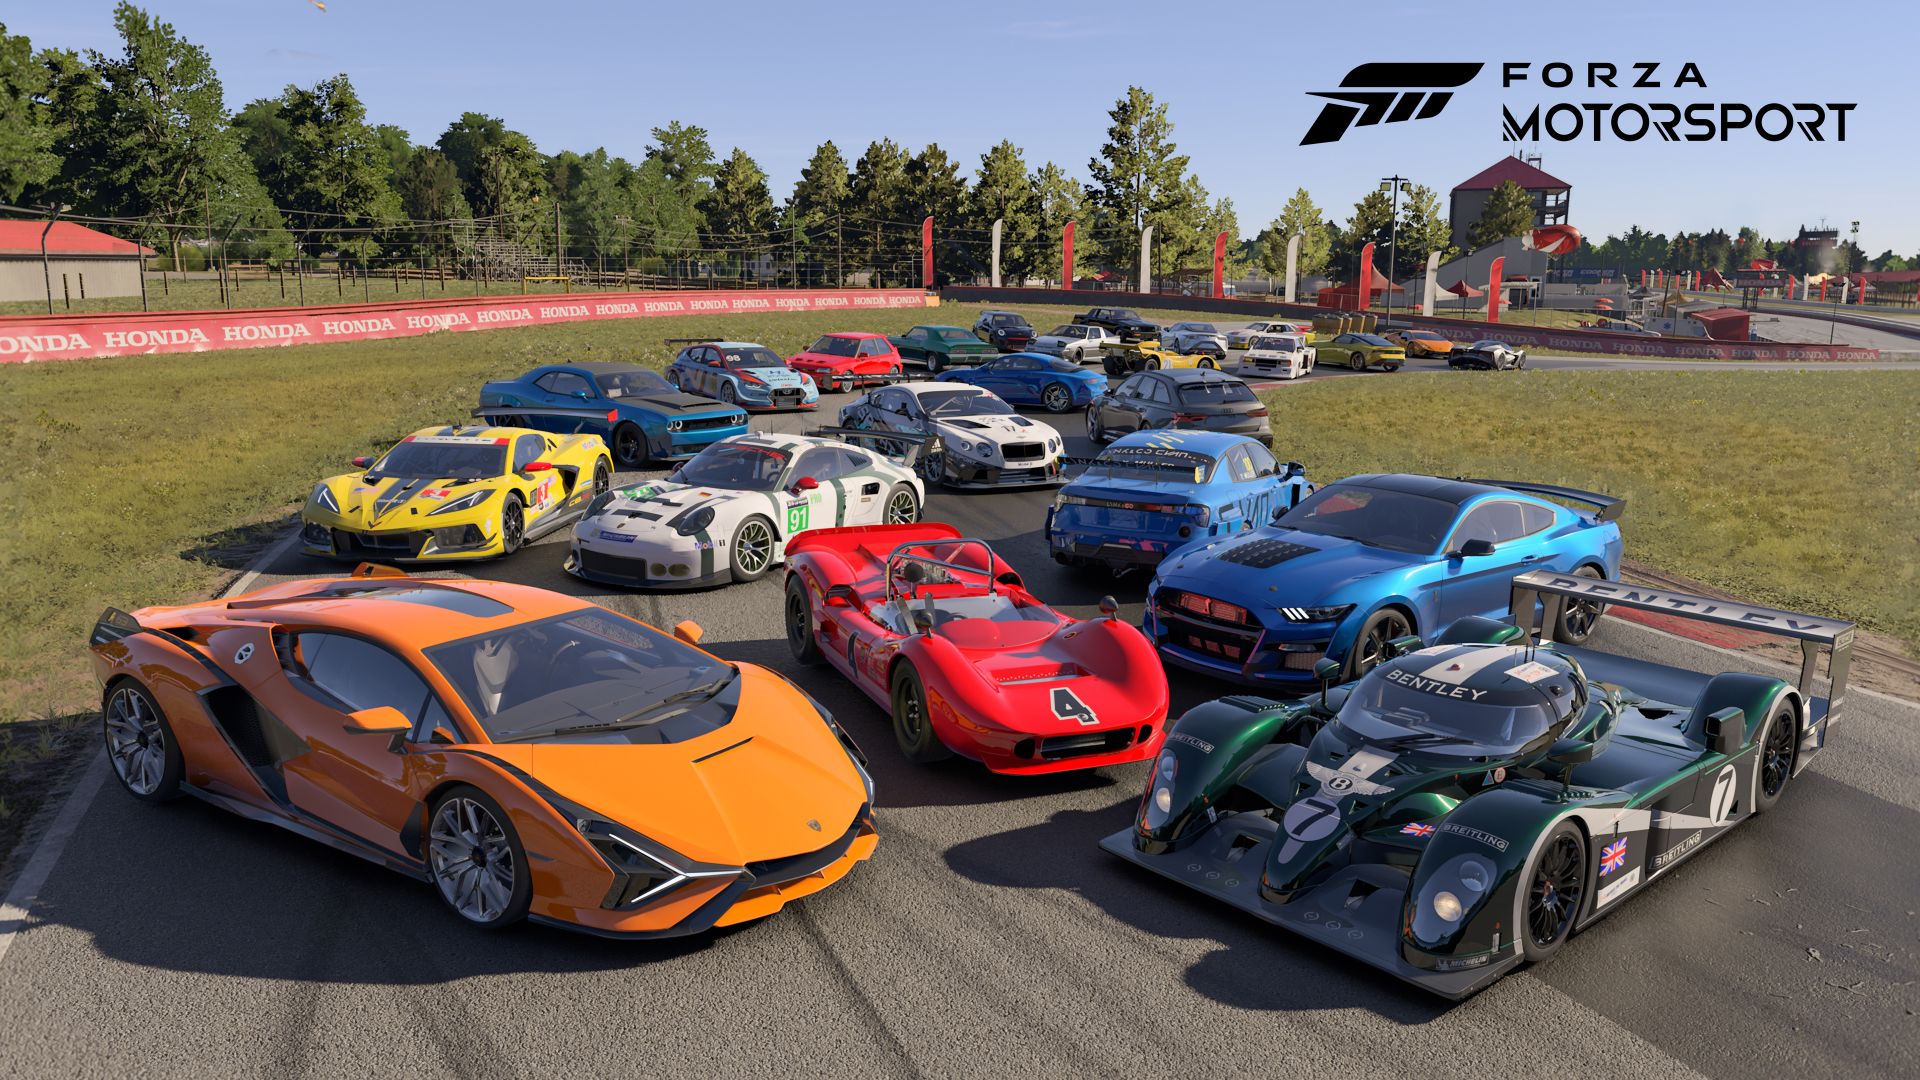 This Year's New Forza Motorsport Game May Be the Last One The Drive